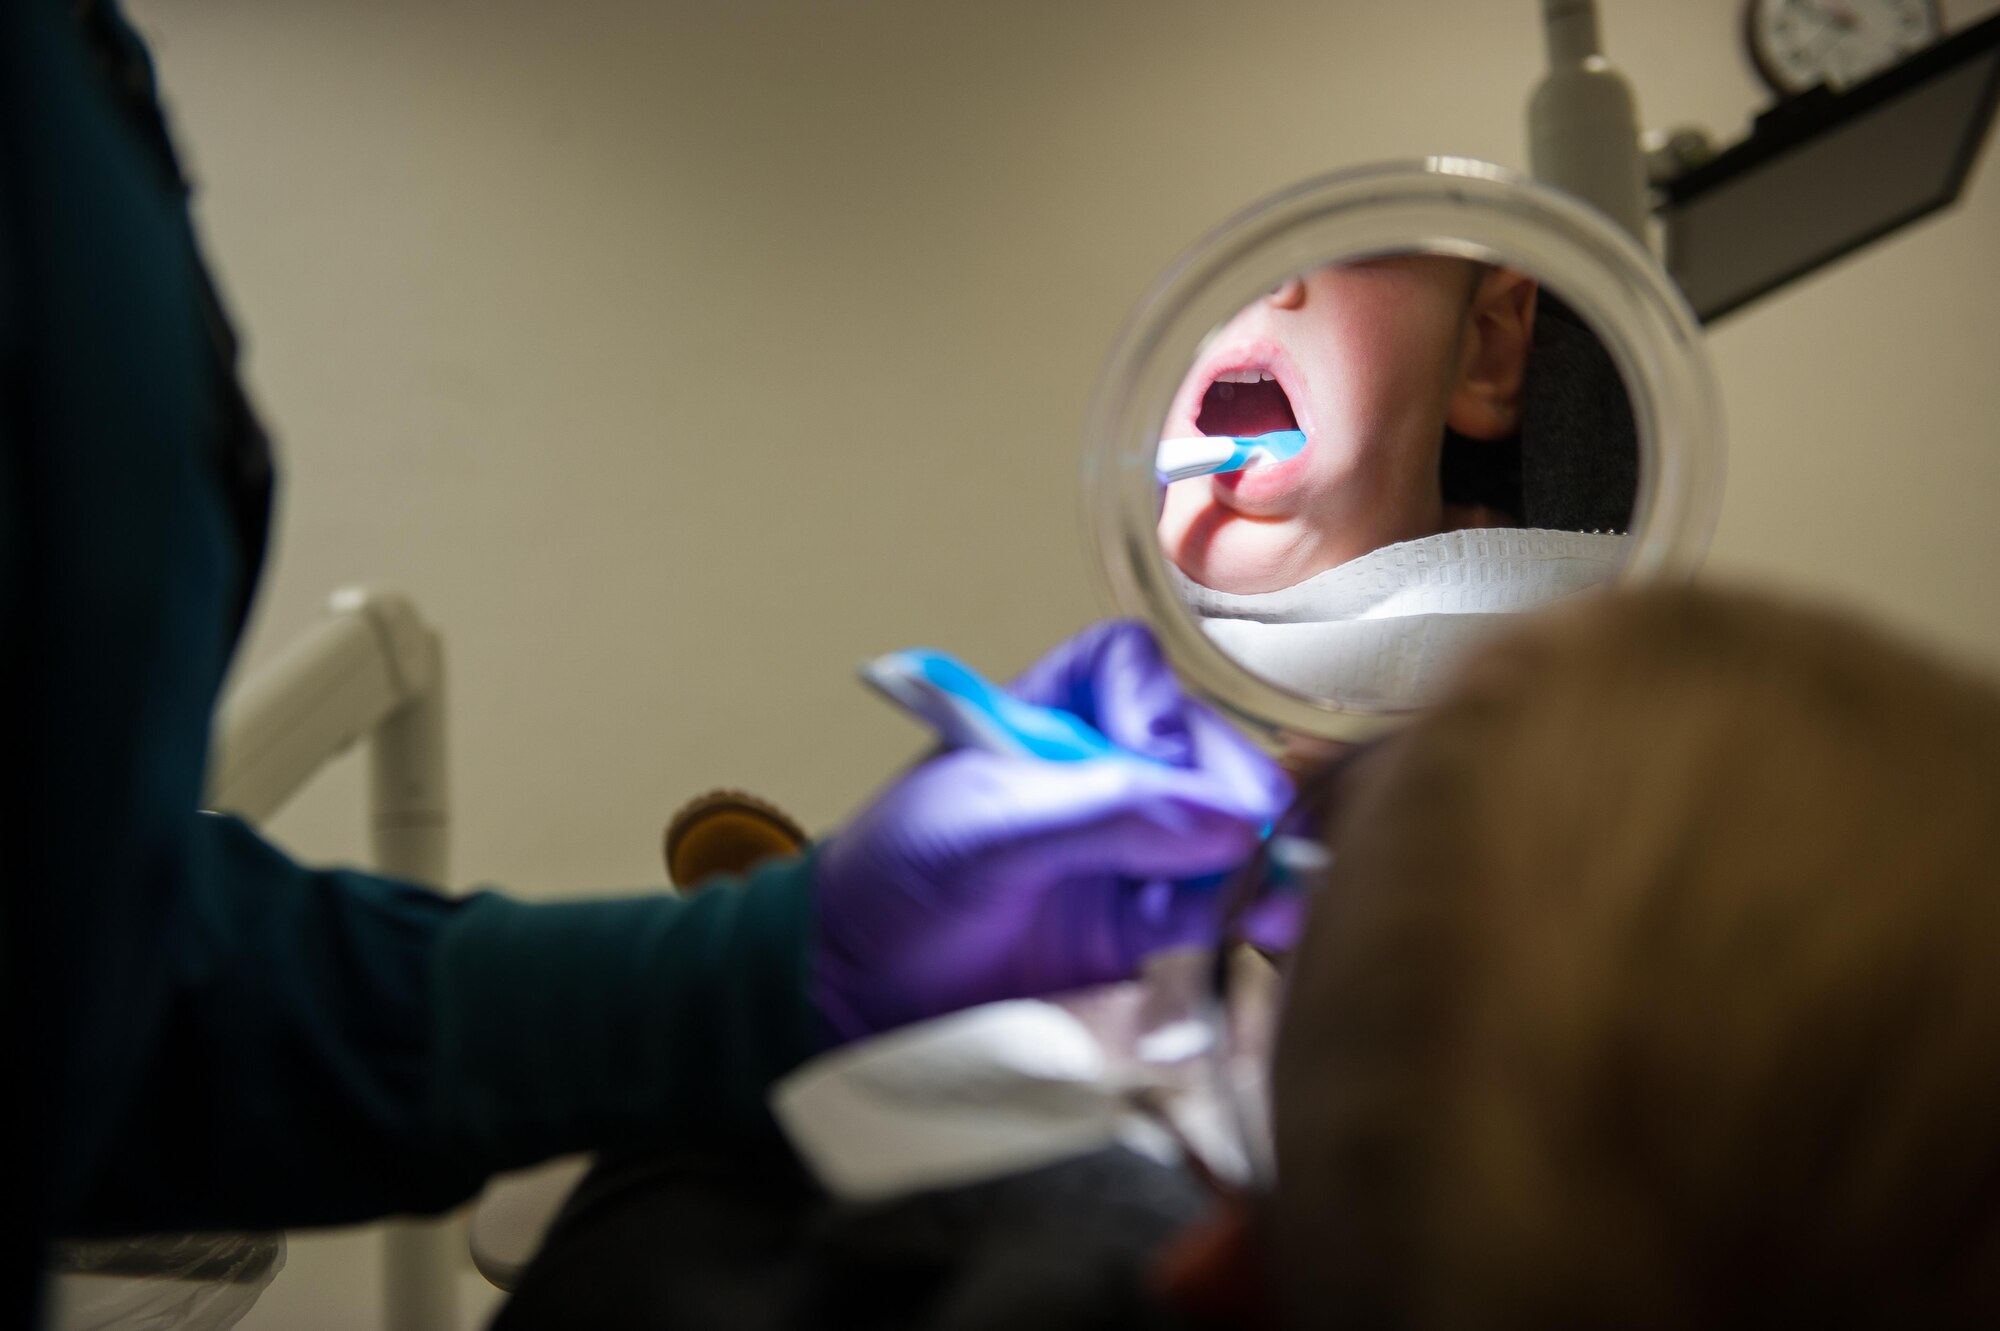 Channing Wray, holds a mirror to watch as his dentist cleans his teeth during the “Little Teeth, Big Smile” event at Ramstein Air Base, Germany, Nov. 5, 2016. The event was a way for children up to 10 years old to get their teeth checked or cleaned in an environment tailored to their age group. According to the Center for Disease and Control, tooth decay is one of the most common chronic conditions of childhood in the United States. Untreated cavities can cause pain and infections that may lead to problems with eating, speaking, playing, and learning. (U.S. Air Force photo by Airman 1st Class Lane T. Plummer)